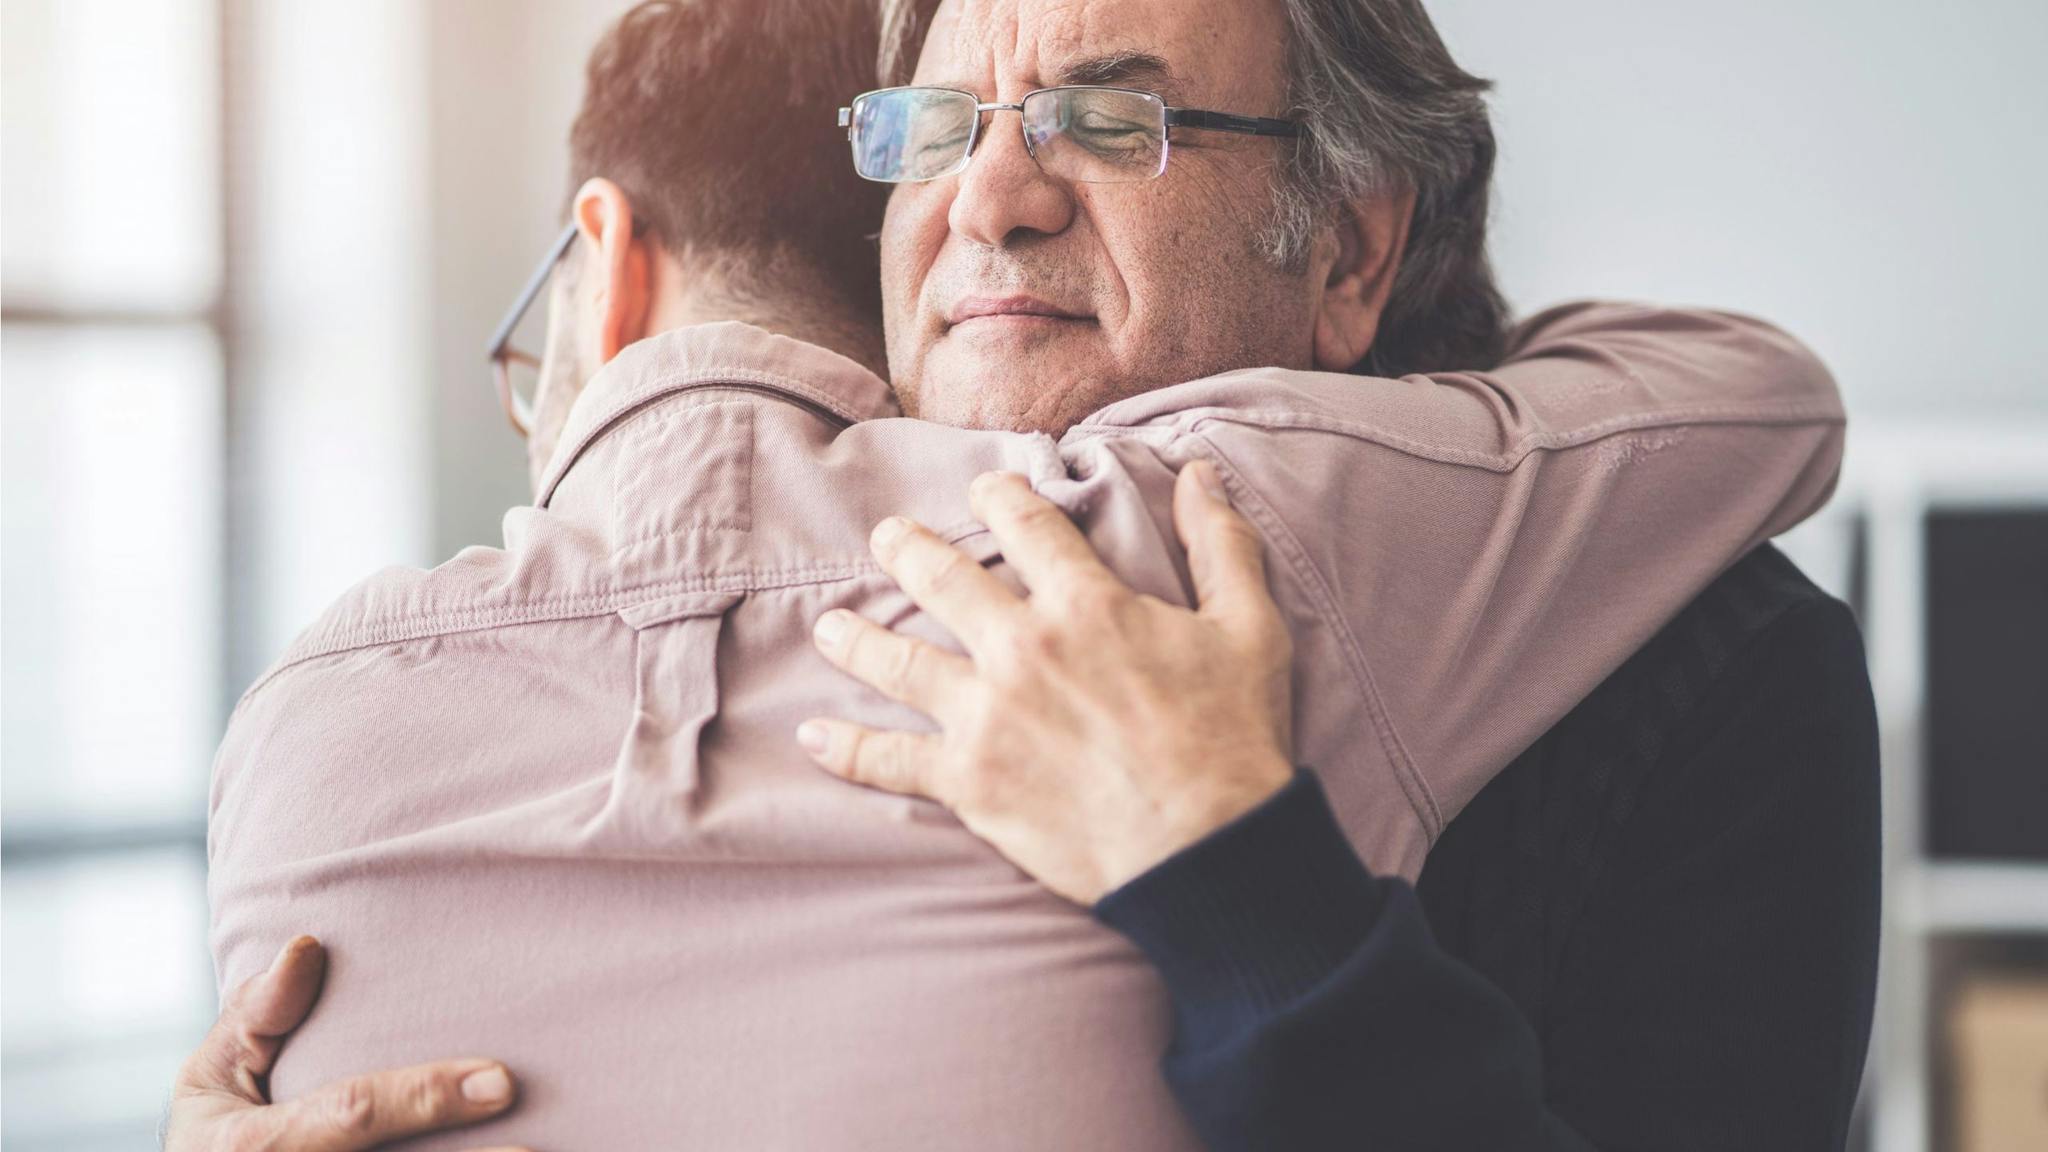 The benefits of gratitude for people living with dementia